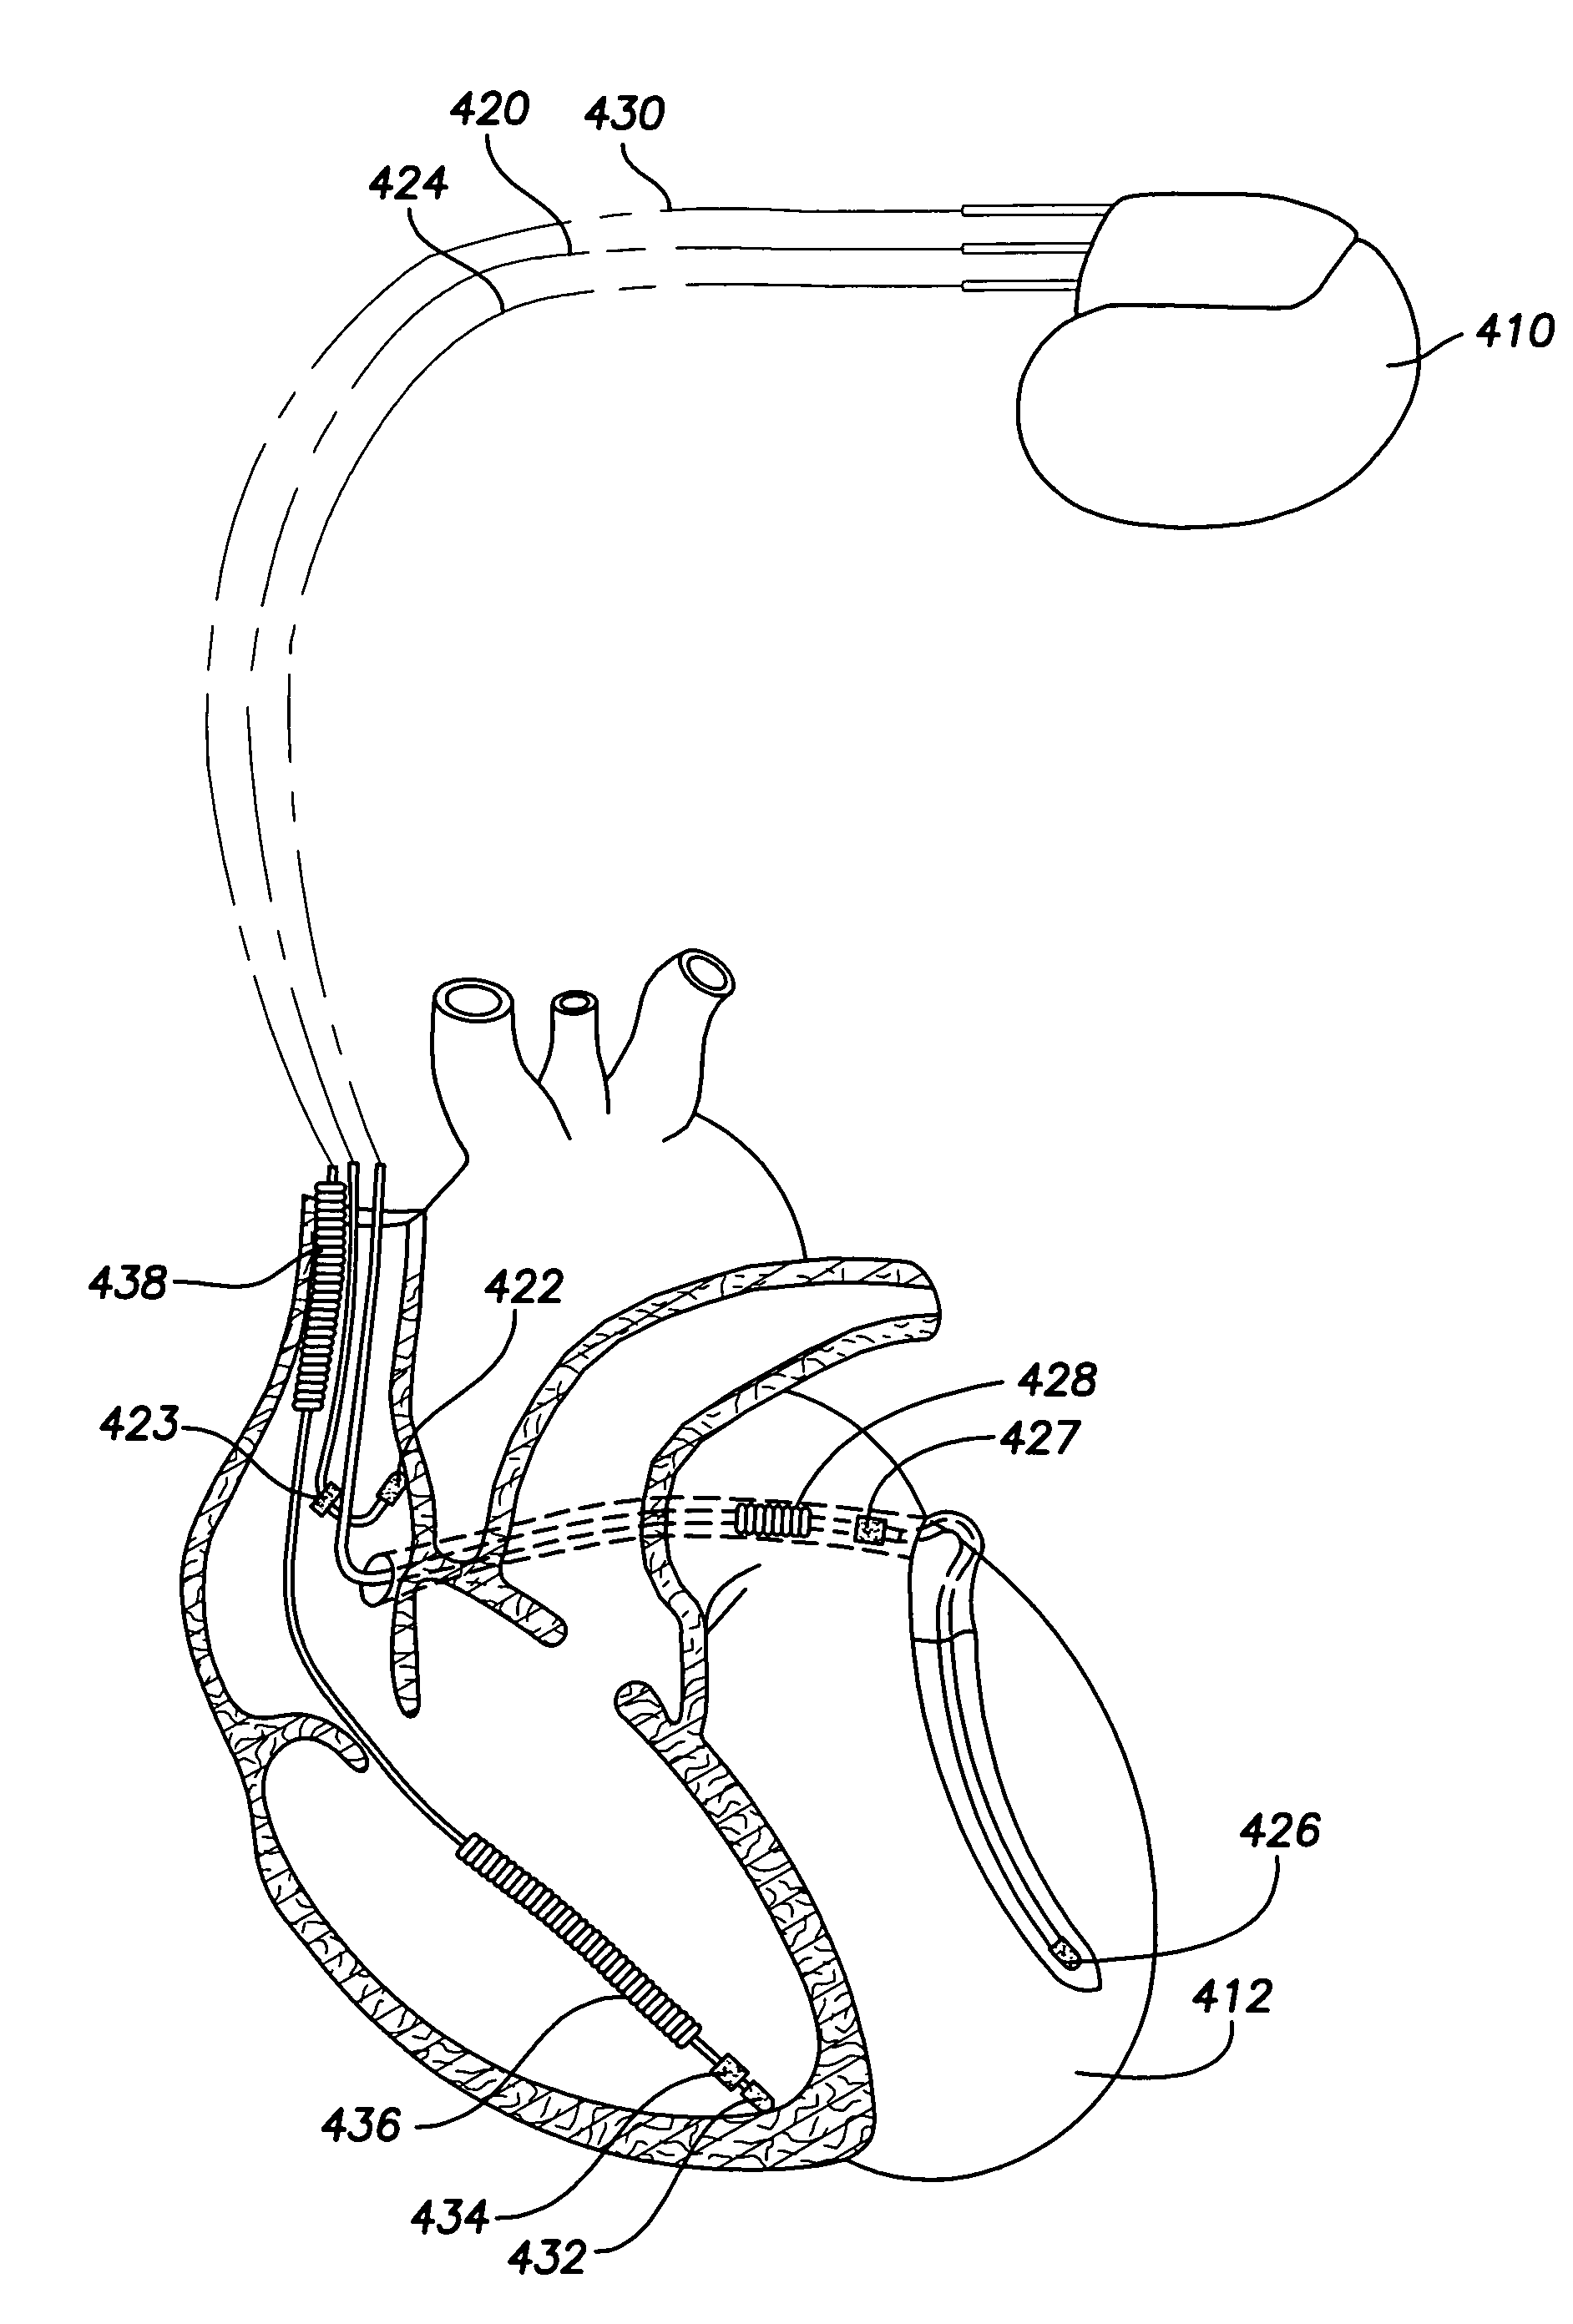 System and method for determining preferred atrioventricular pacing delay values based on intracardiac electrogram signals